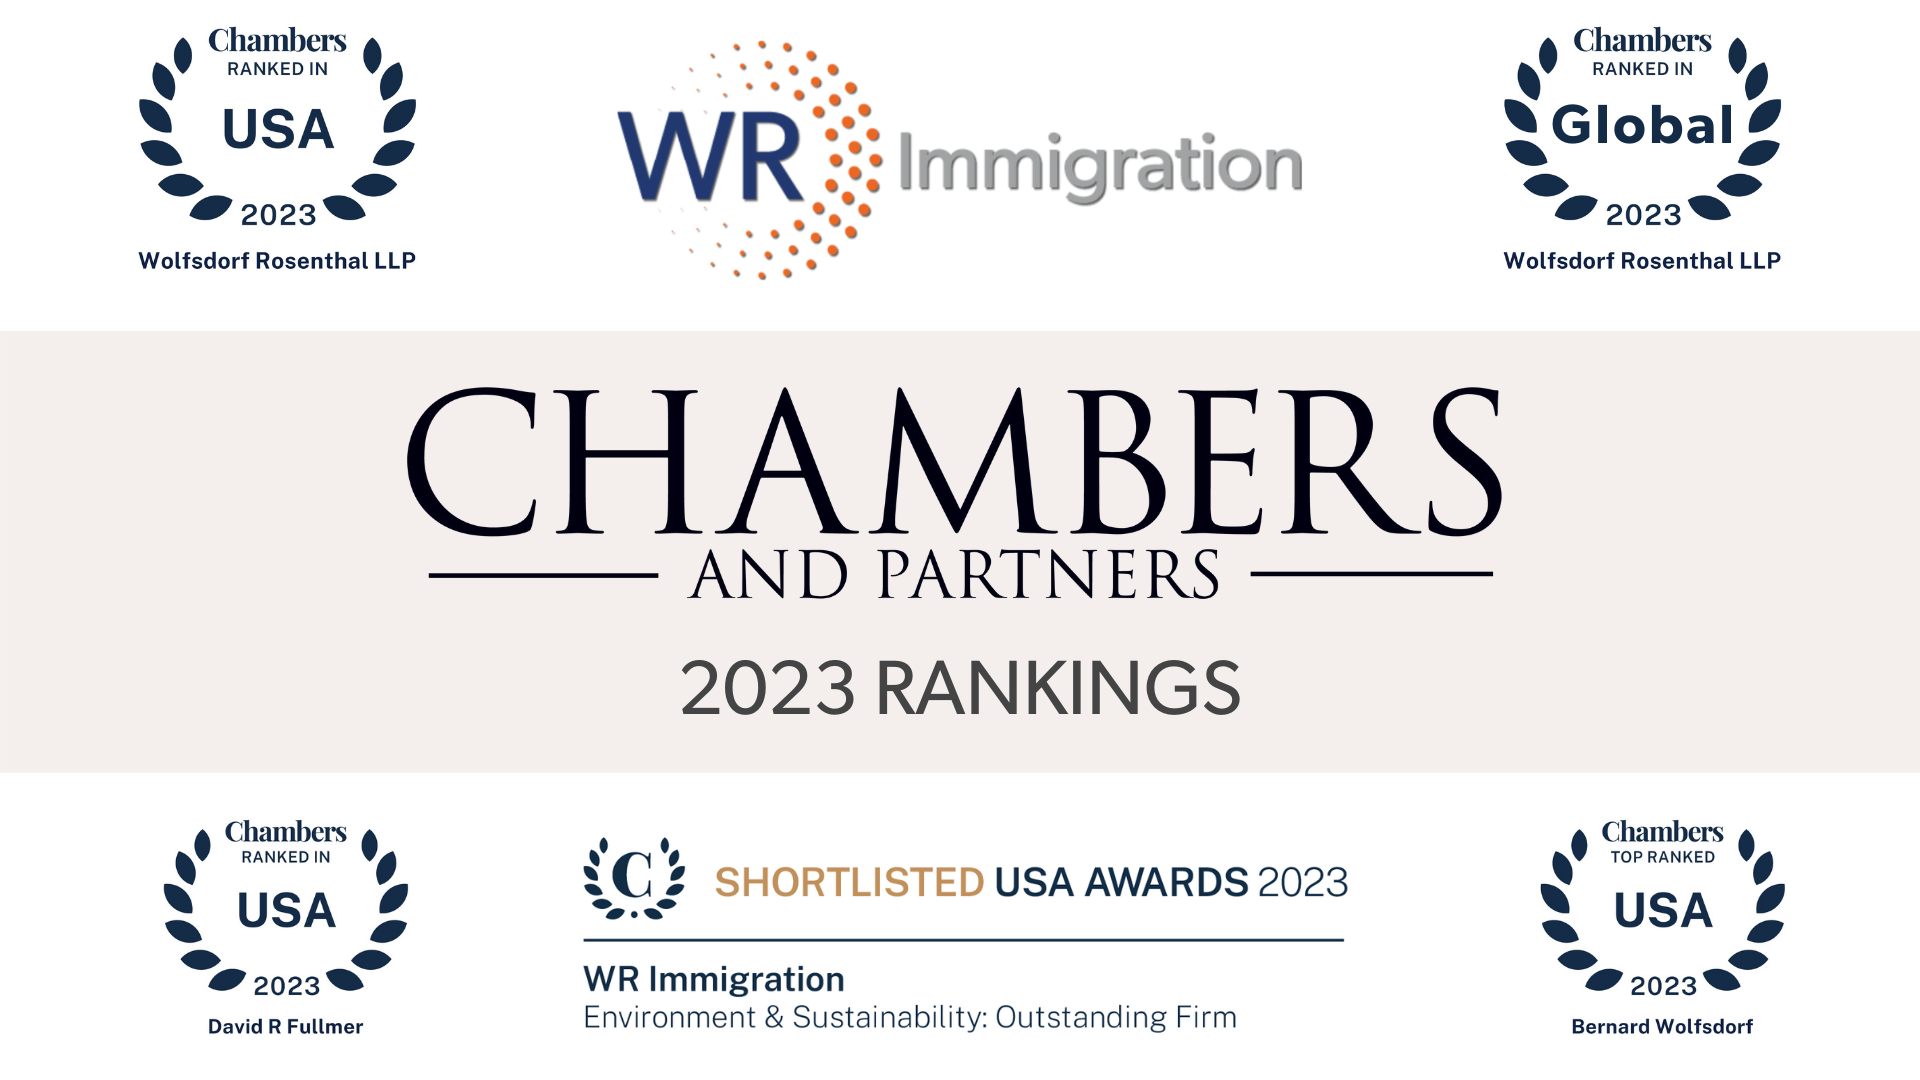 Chambers USA 2023 Recognizes WR Immigration Among Top Corporate